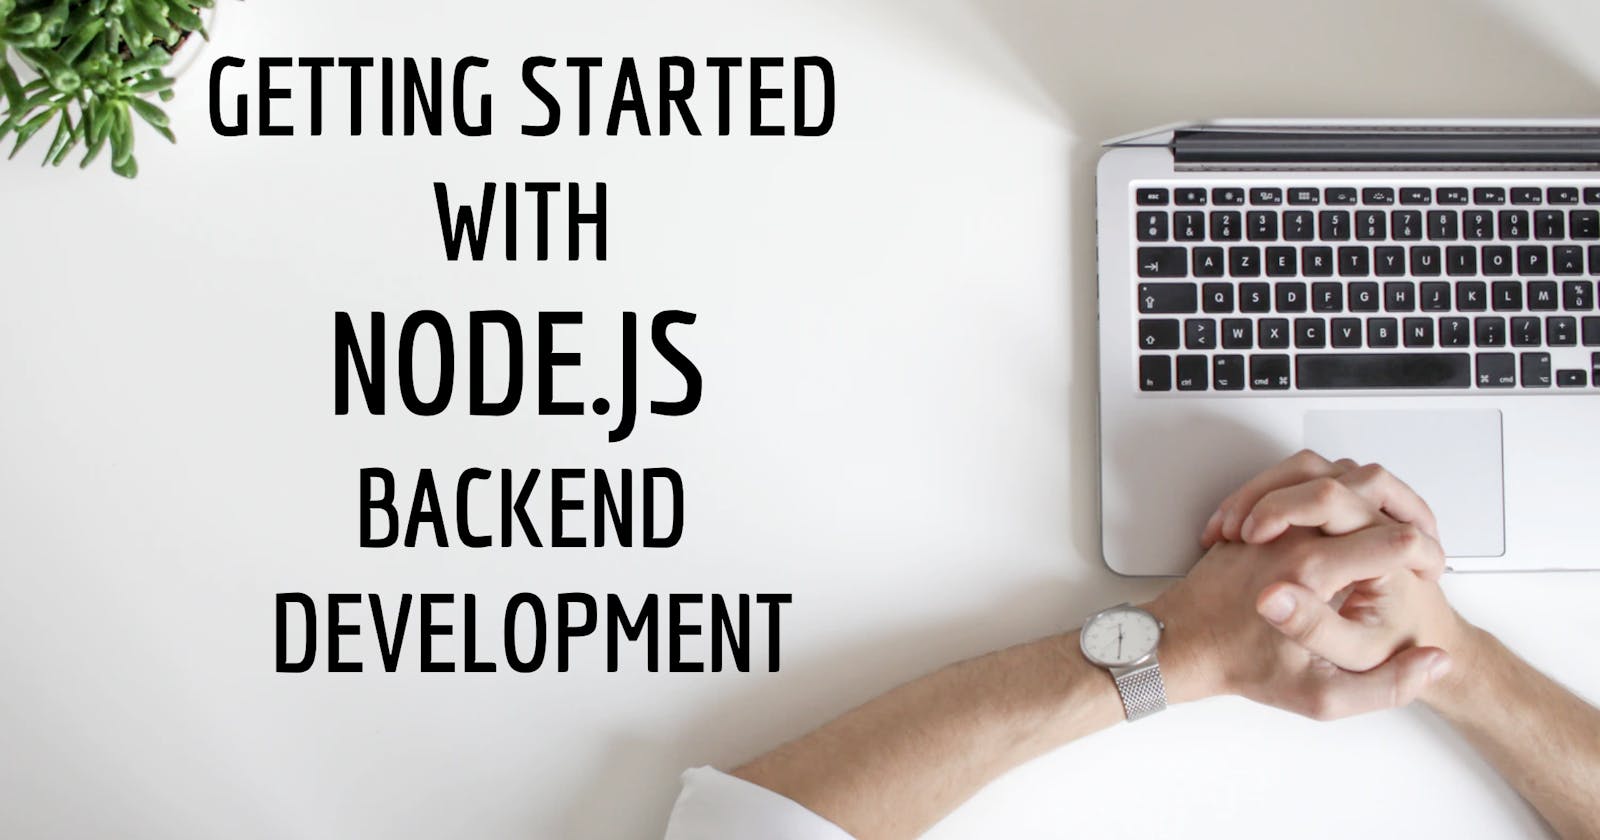 Getting Started with Node.js Backend Development